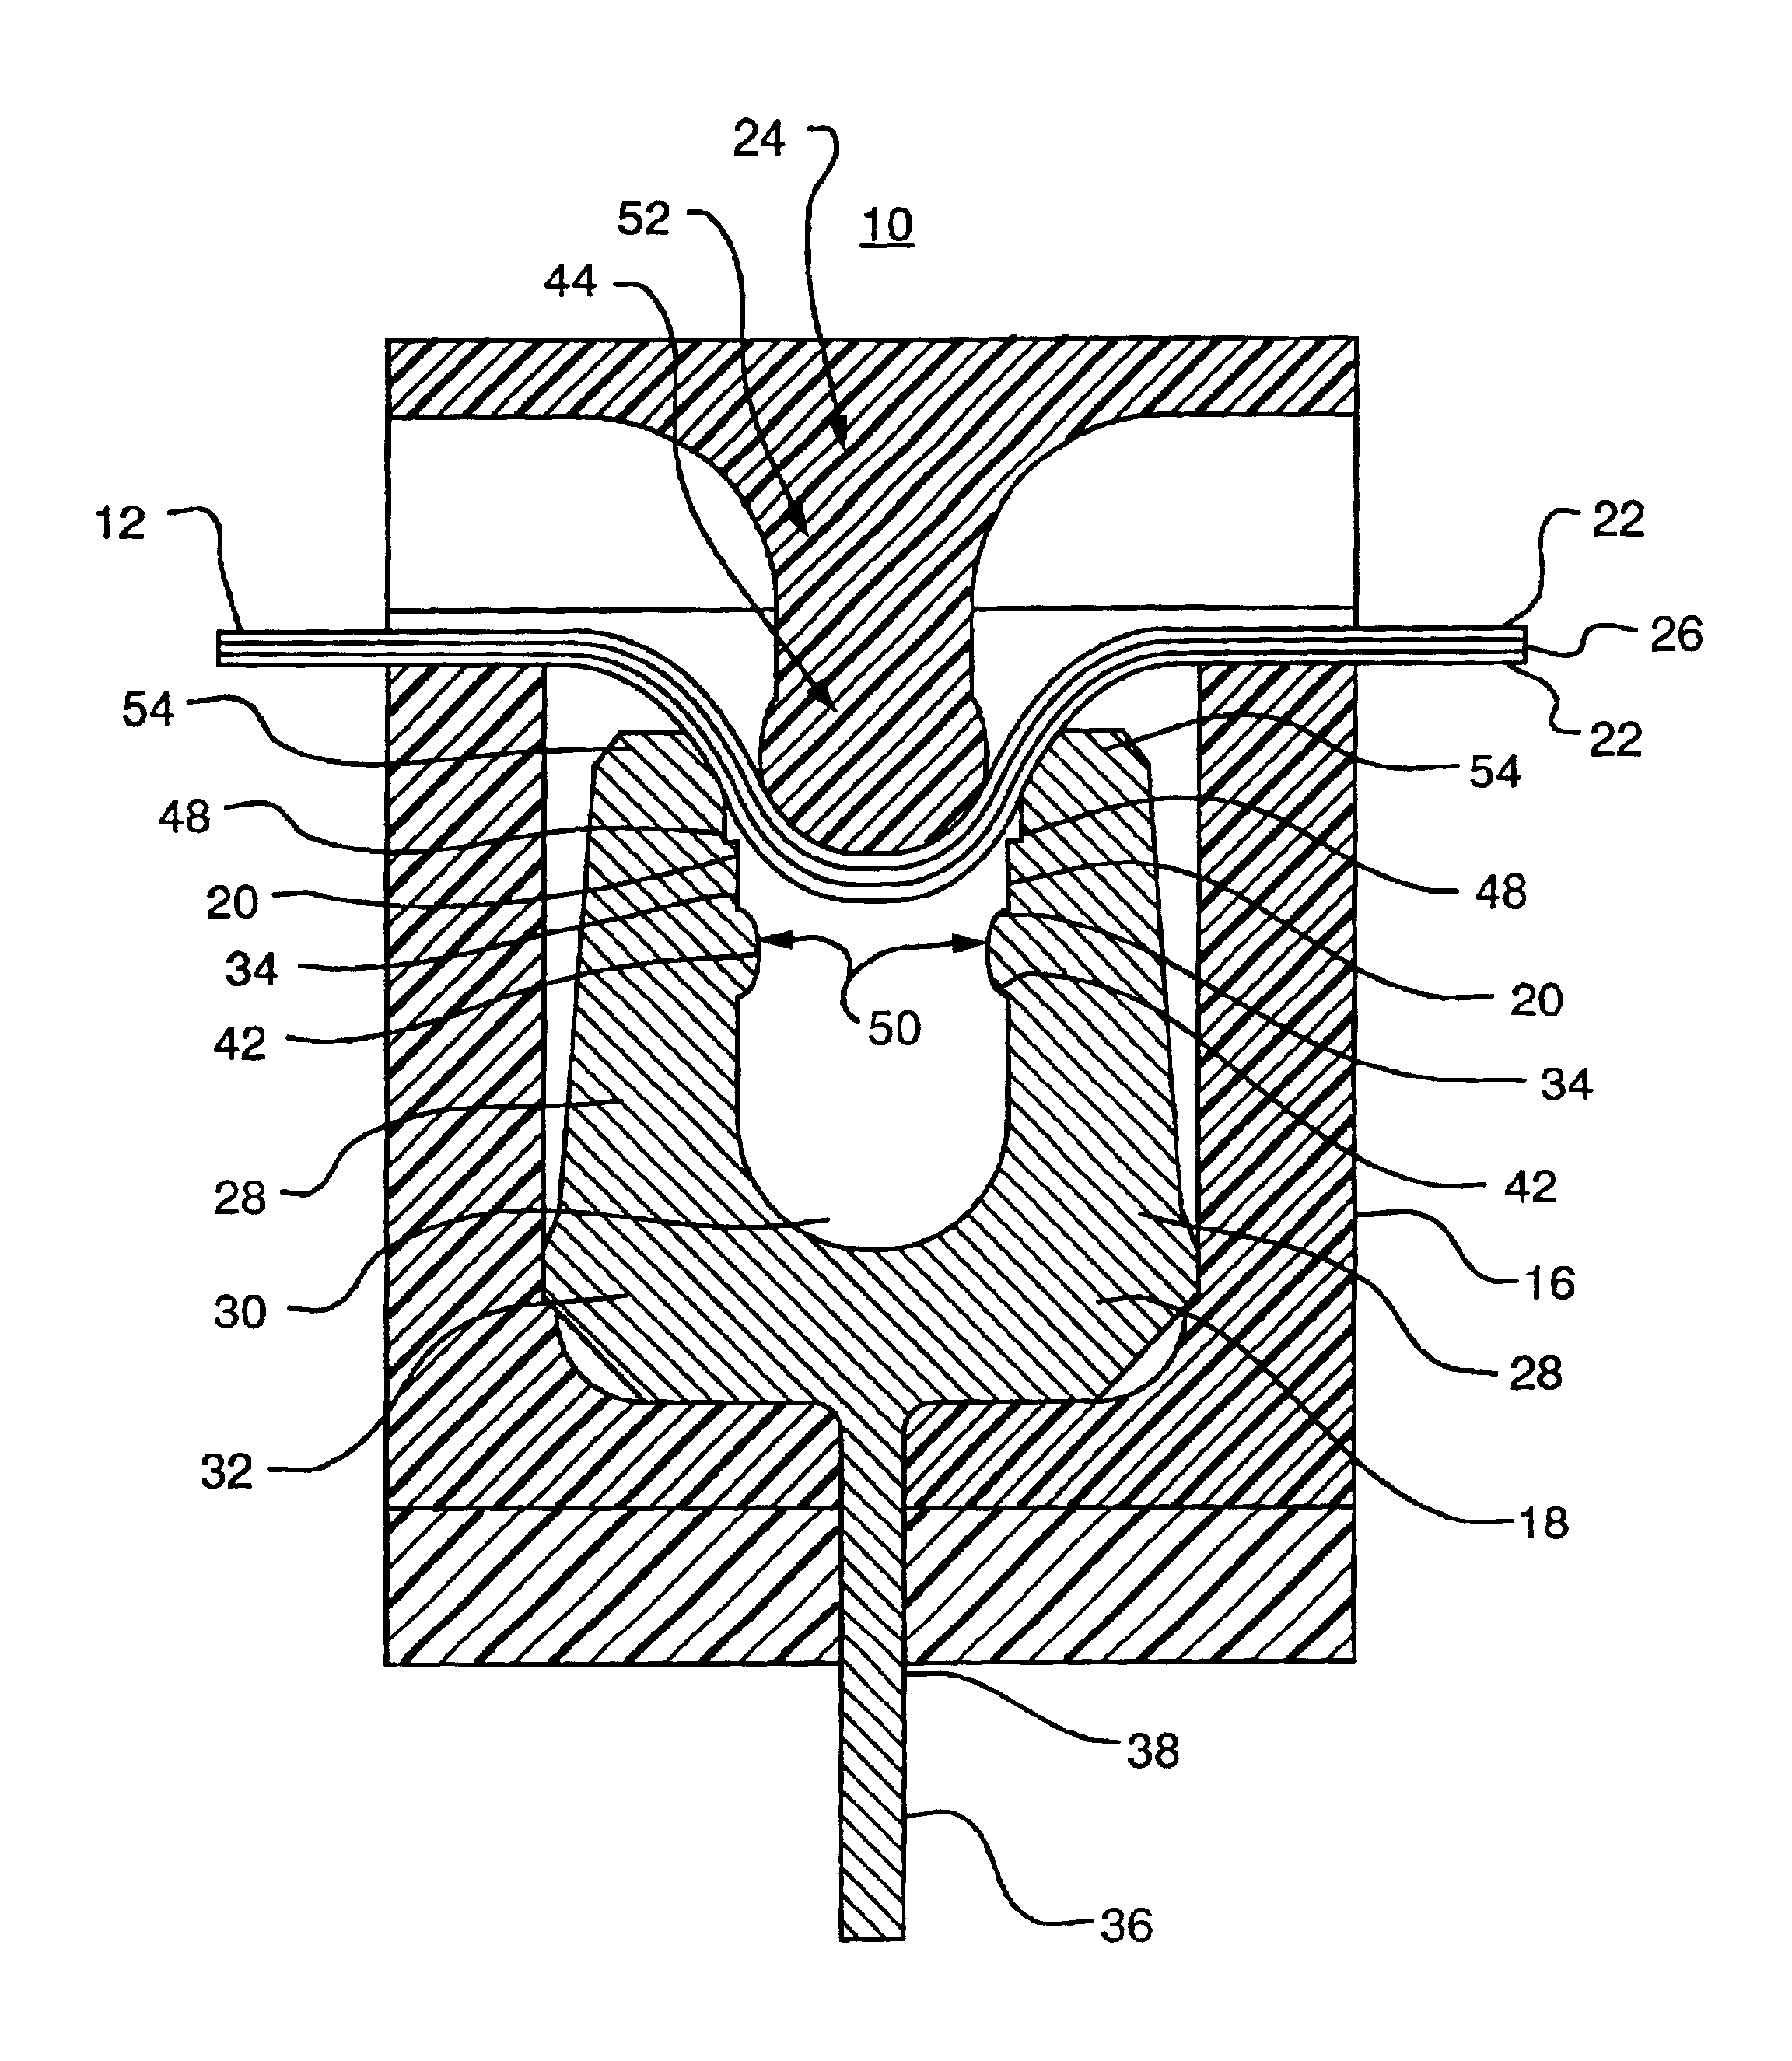 Method of connecting multi conductor cable connector